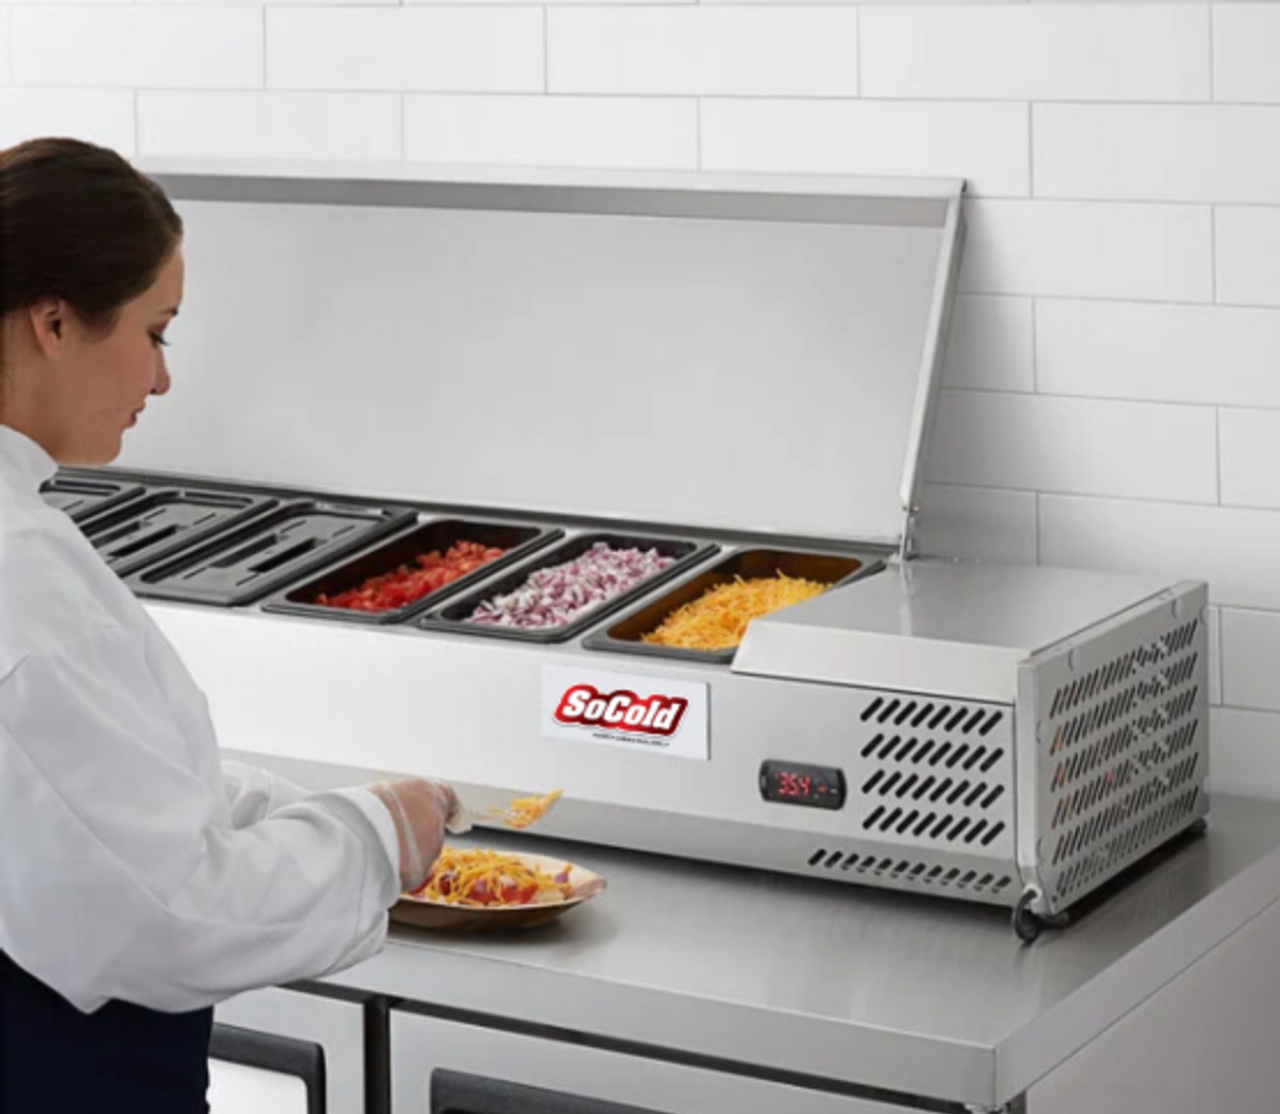 BUY | SHOP | OMCAN REFRIGERATED TOPPING RAILS WITH STAINLESS STEEL COVER. Standard Features: Digital LED temperature display; Stainless steel cover; Suitable for buffet 46657